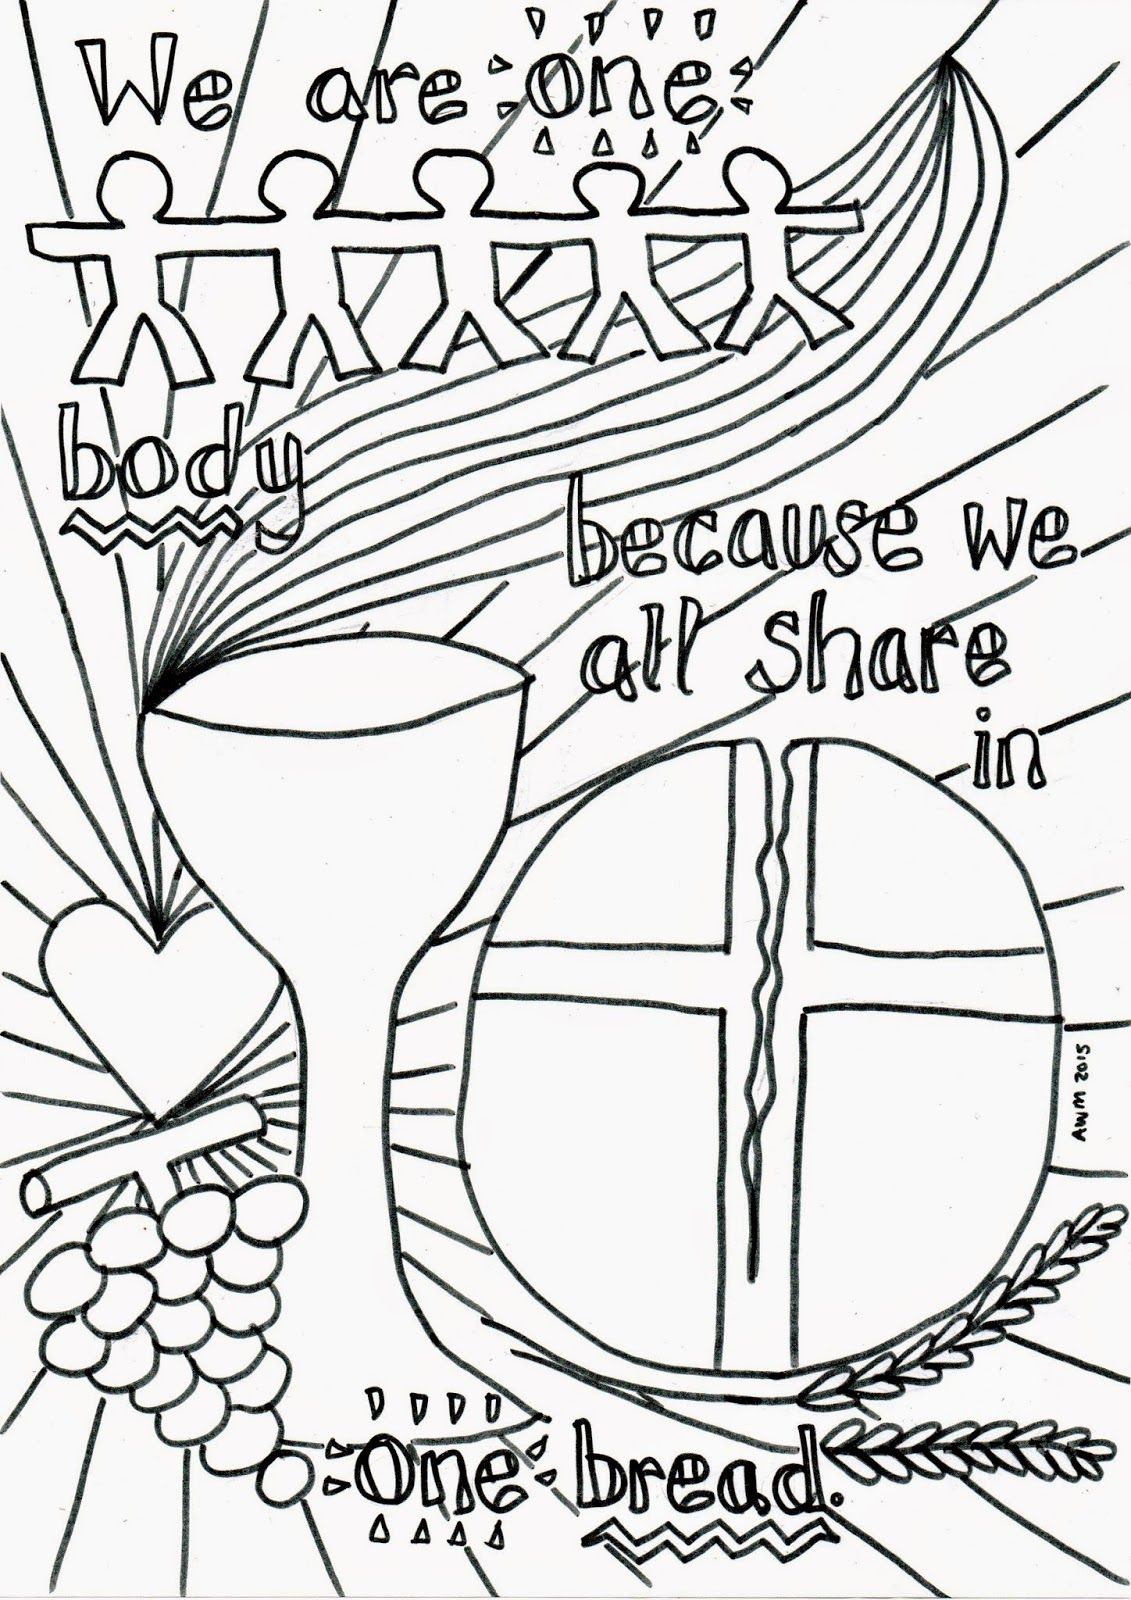 Communion Coloring Pages At GetColorings Free Printable Colorings Pages To Print And Color